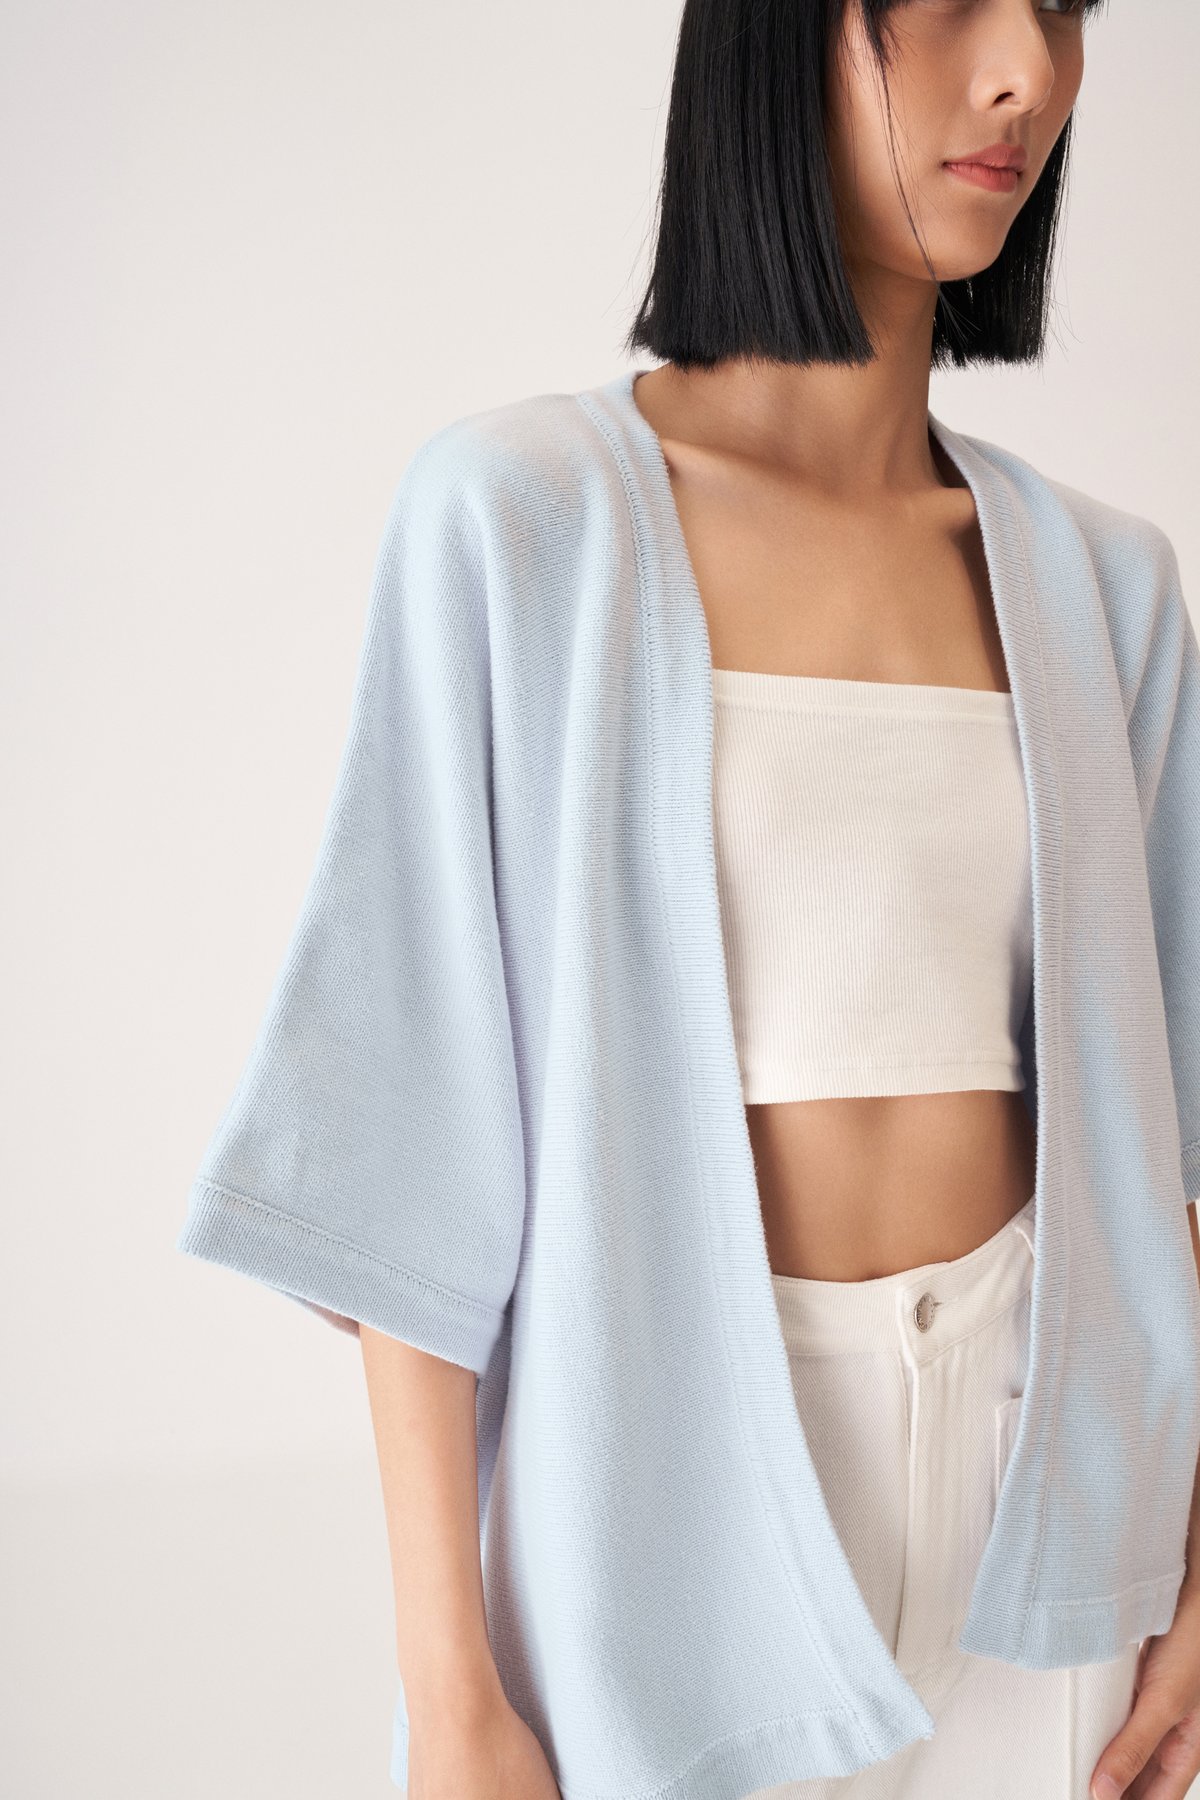 https://dum76bmz7do3s.cloudfront.net/sites/files/theclosetlover/images/products/202307/1200xAUTO/tavia_knit_kimono_in_sky_blue-4.jpg